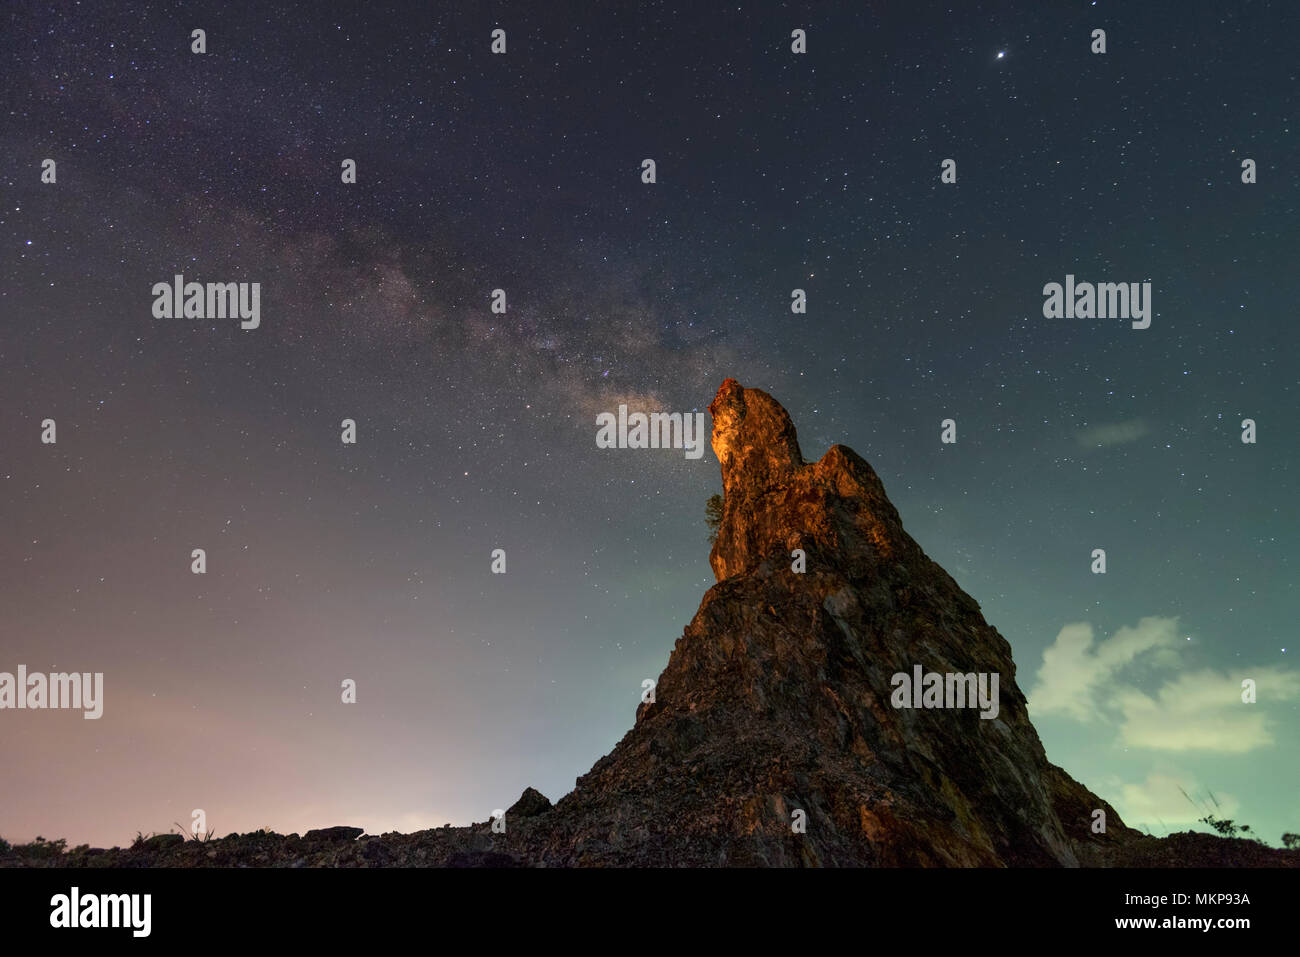 Milky way over the Rock Mountain Stock Photo